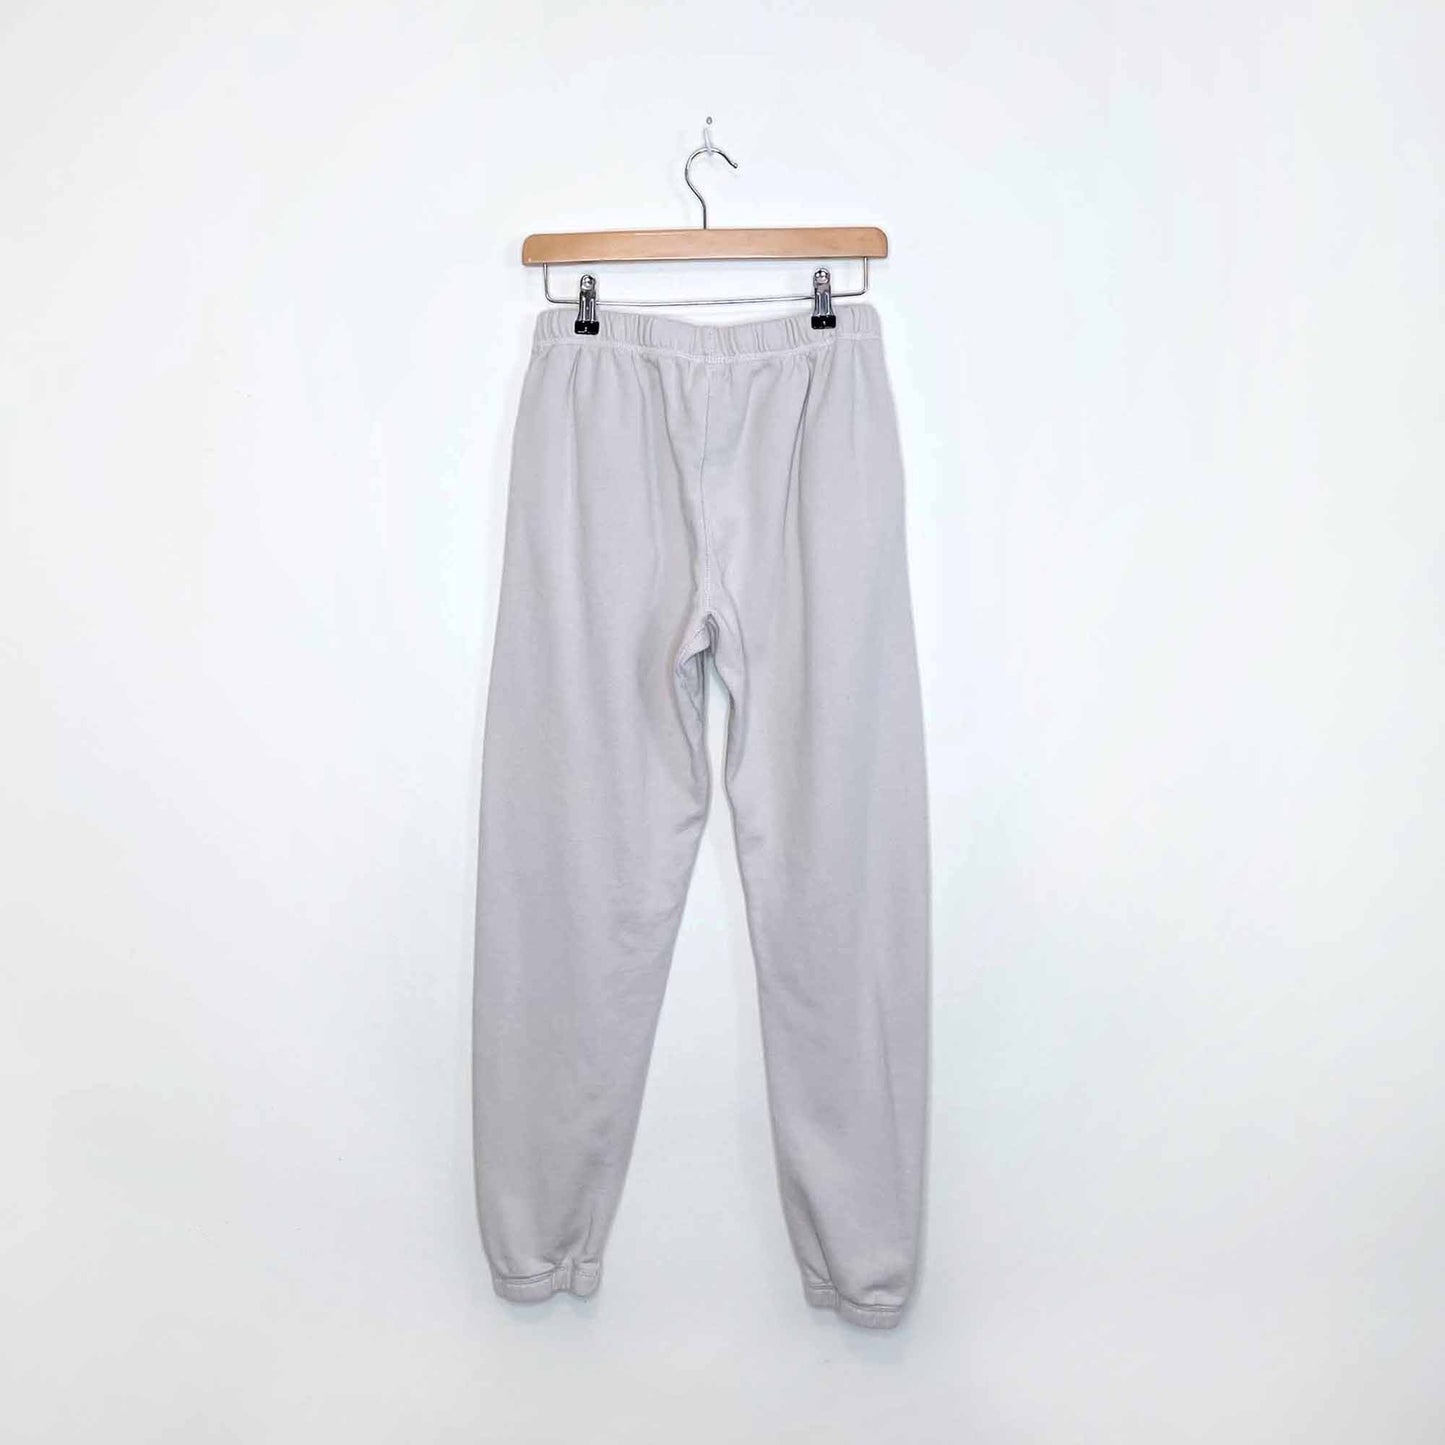 roots 2022 colour edit original sweatpant in oyster grey - size small